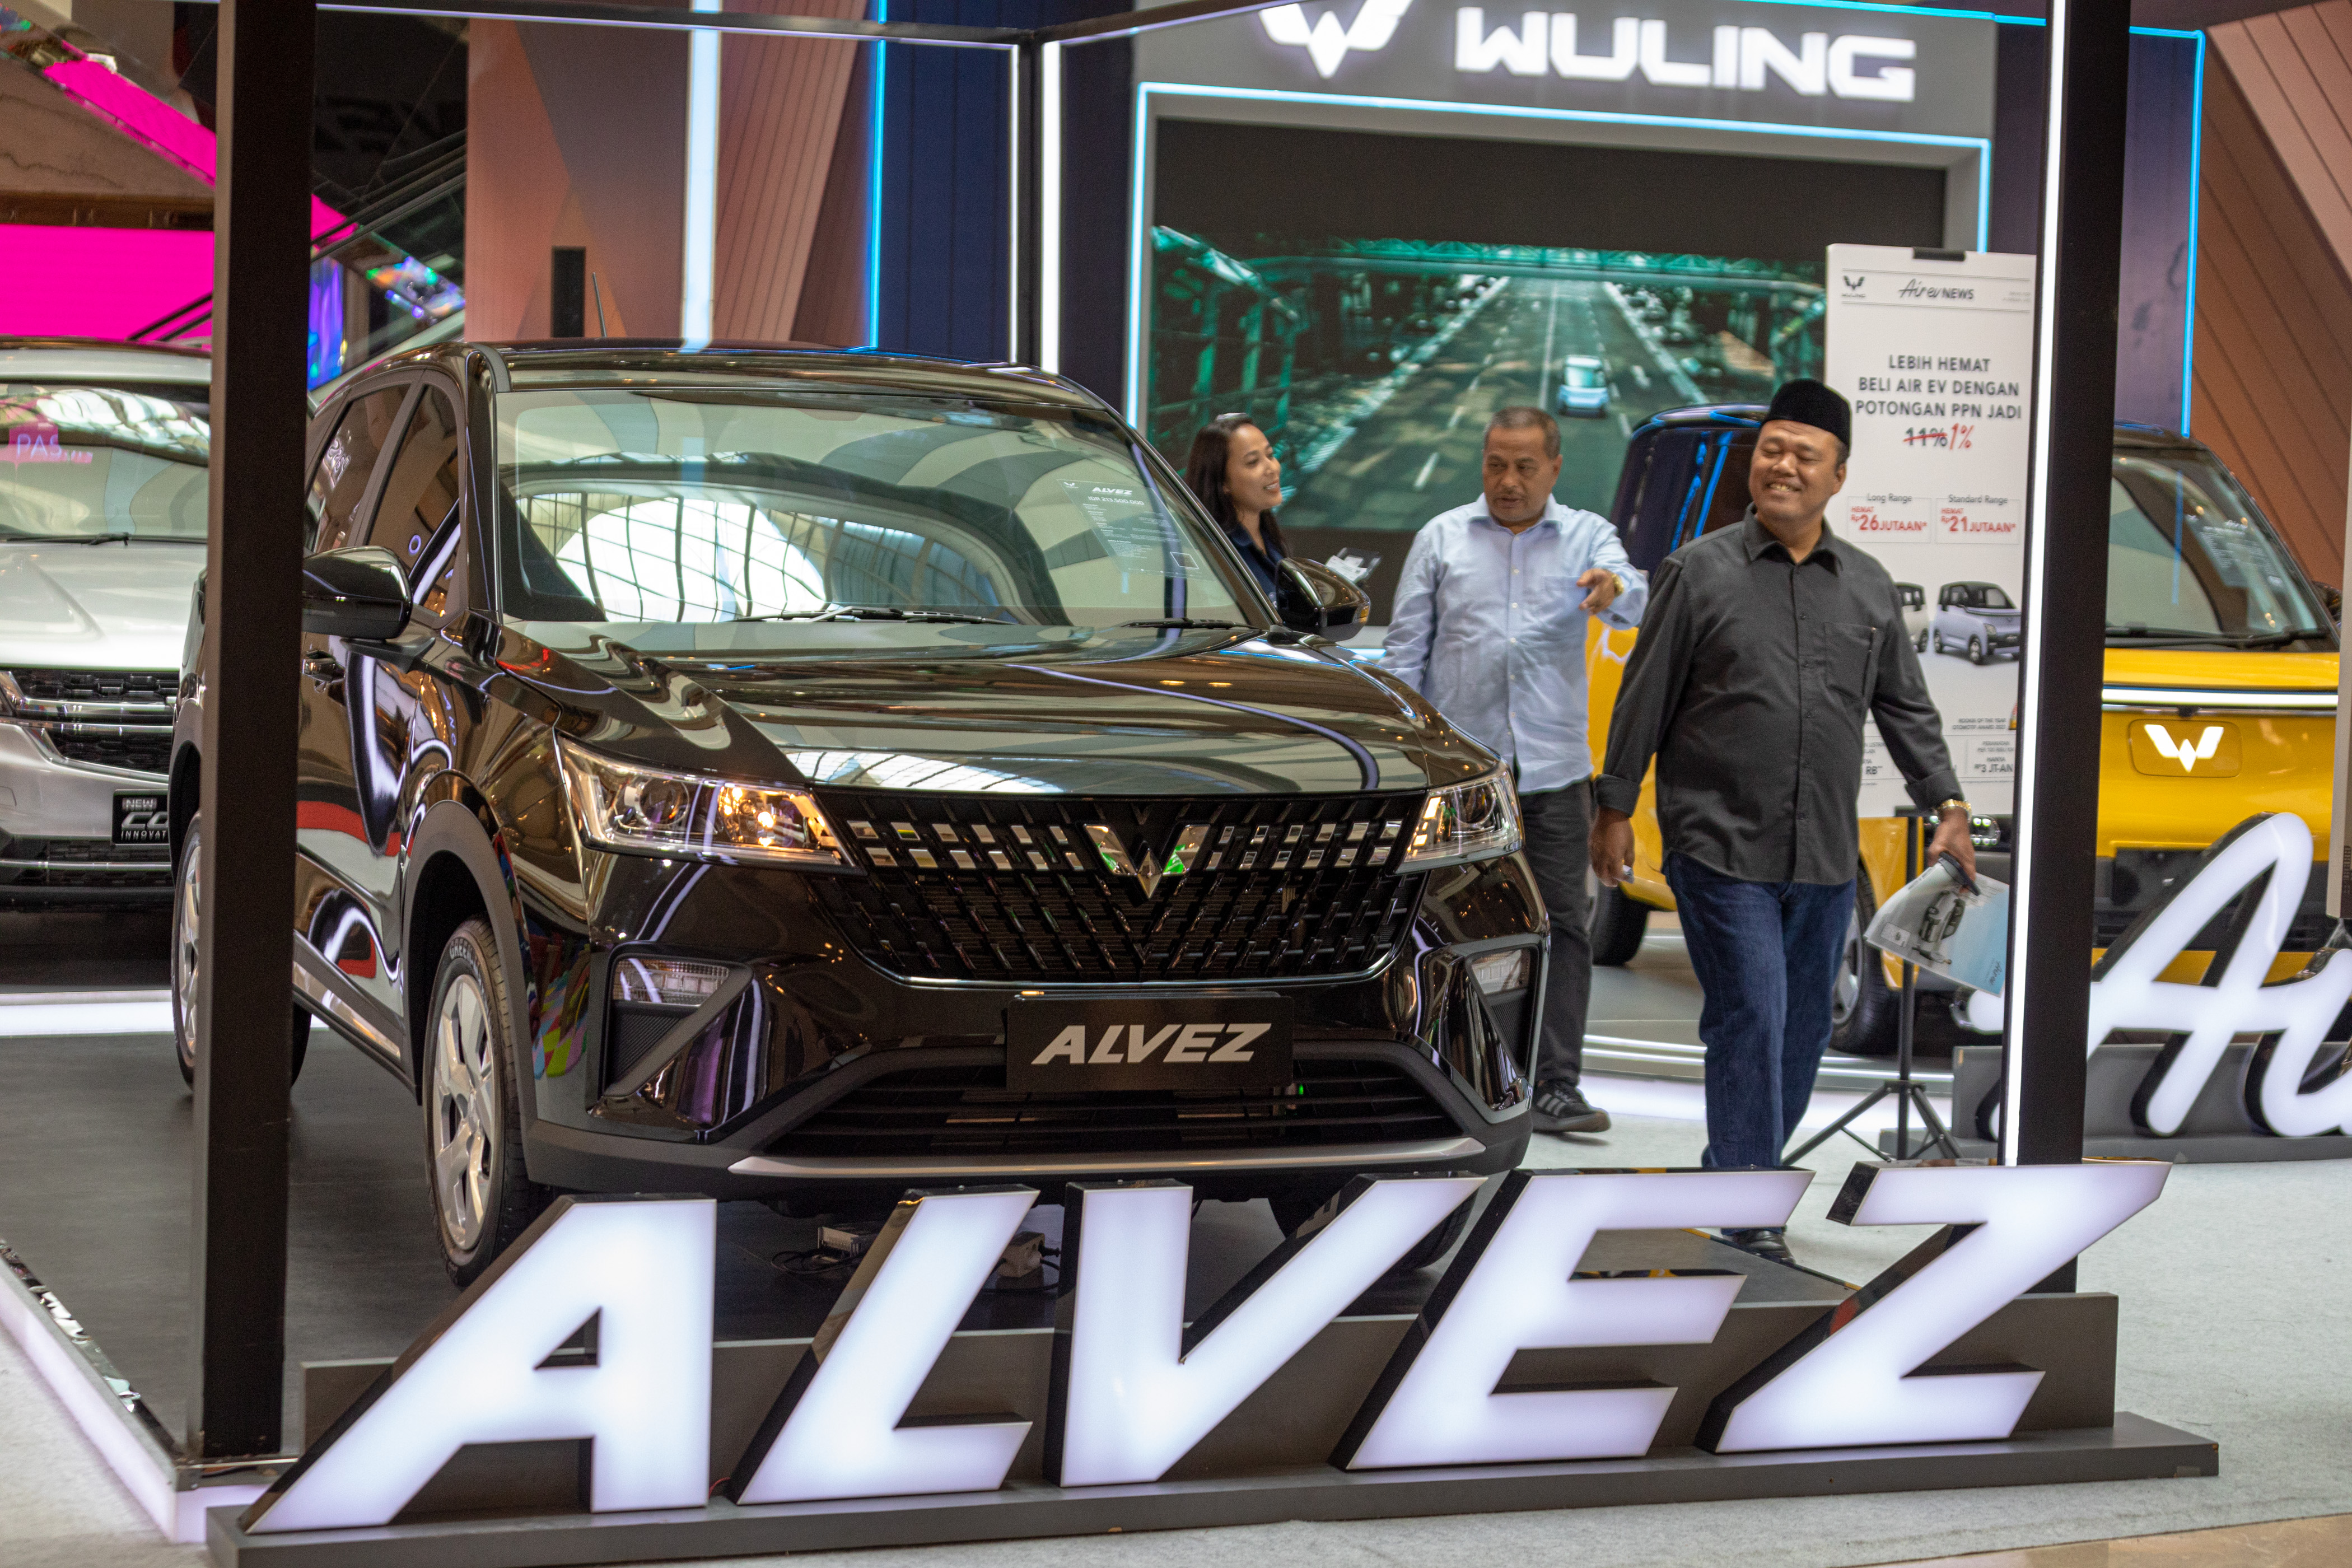 Image Wuling Officially Launches Alvez, ‘Style and Innovation in One SUV’ in Semarang